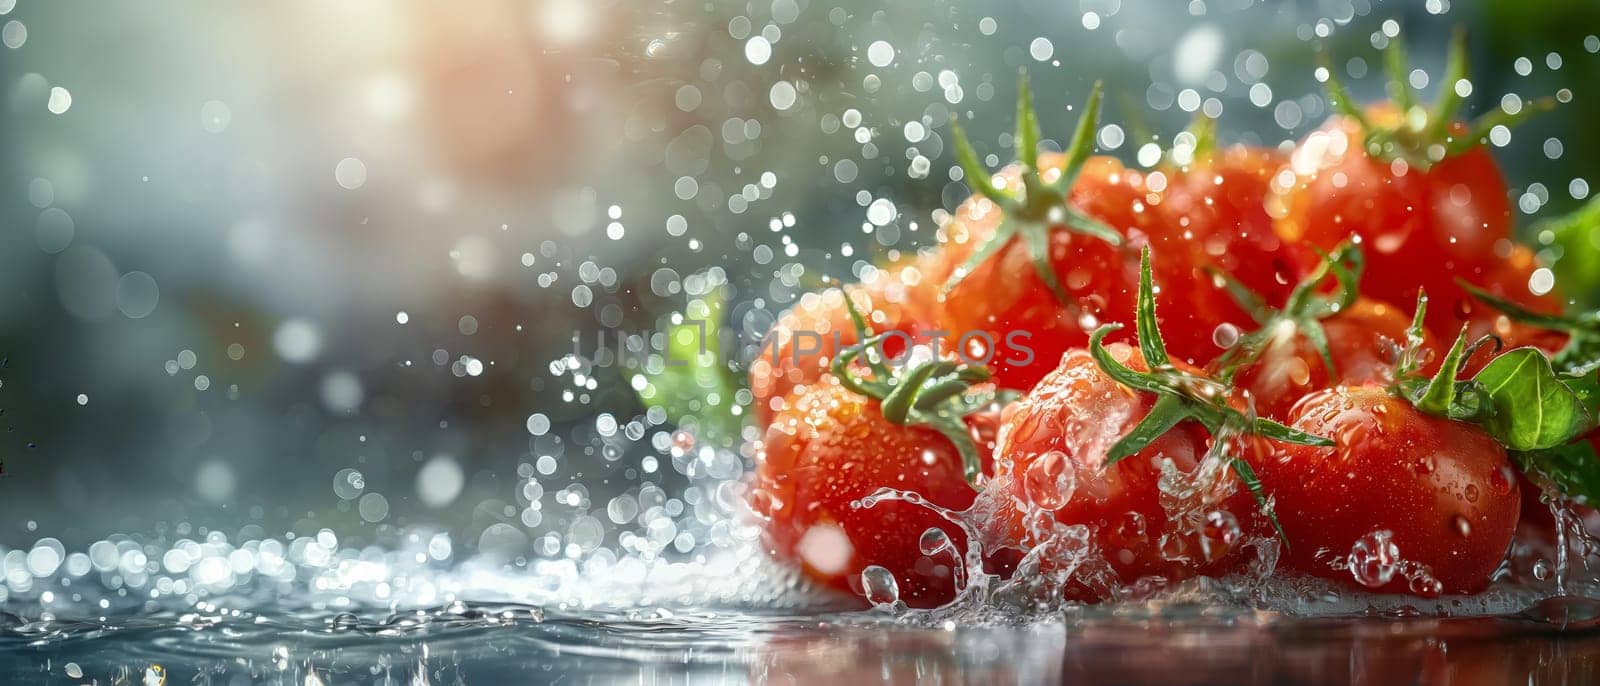 Water Splashes on Tomatoes. by Fischeron